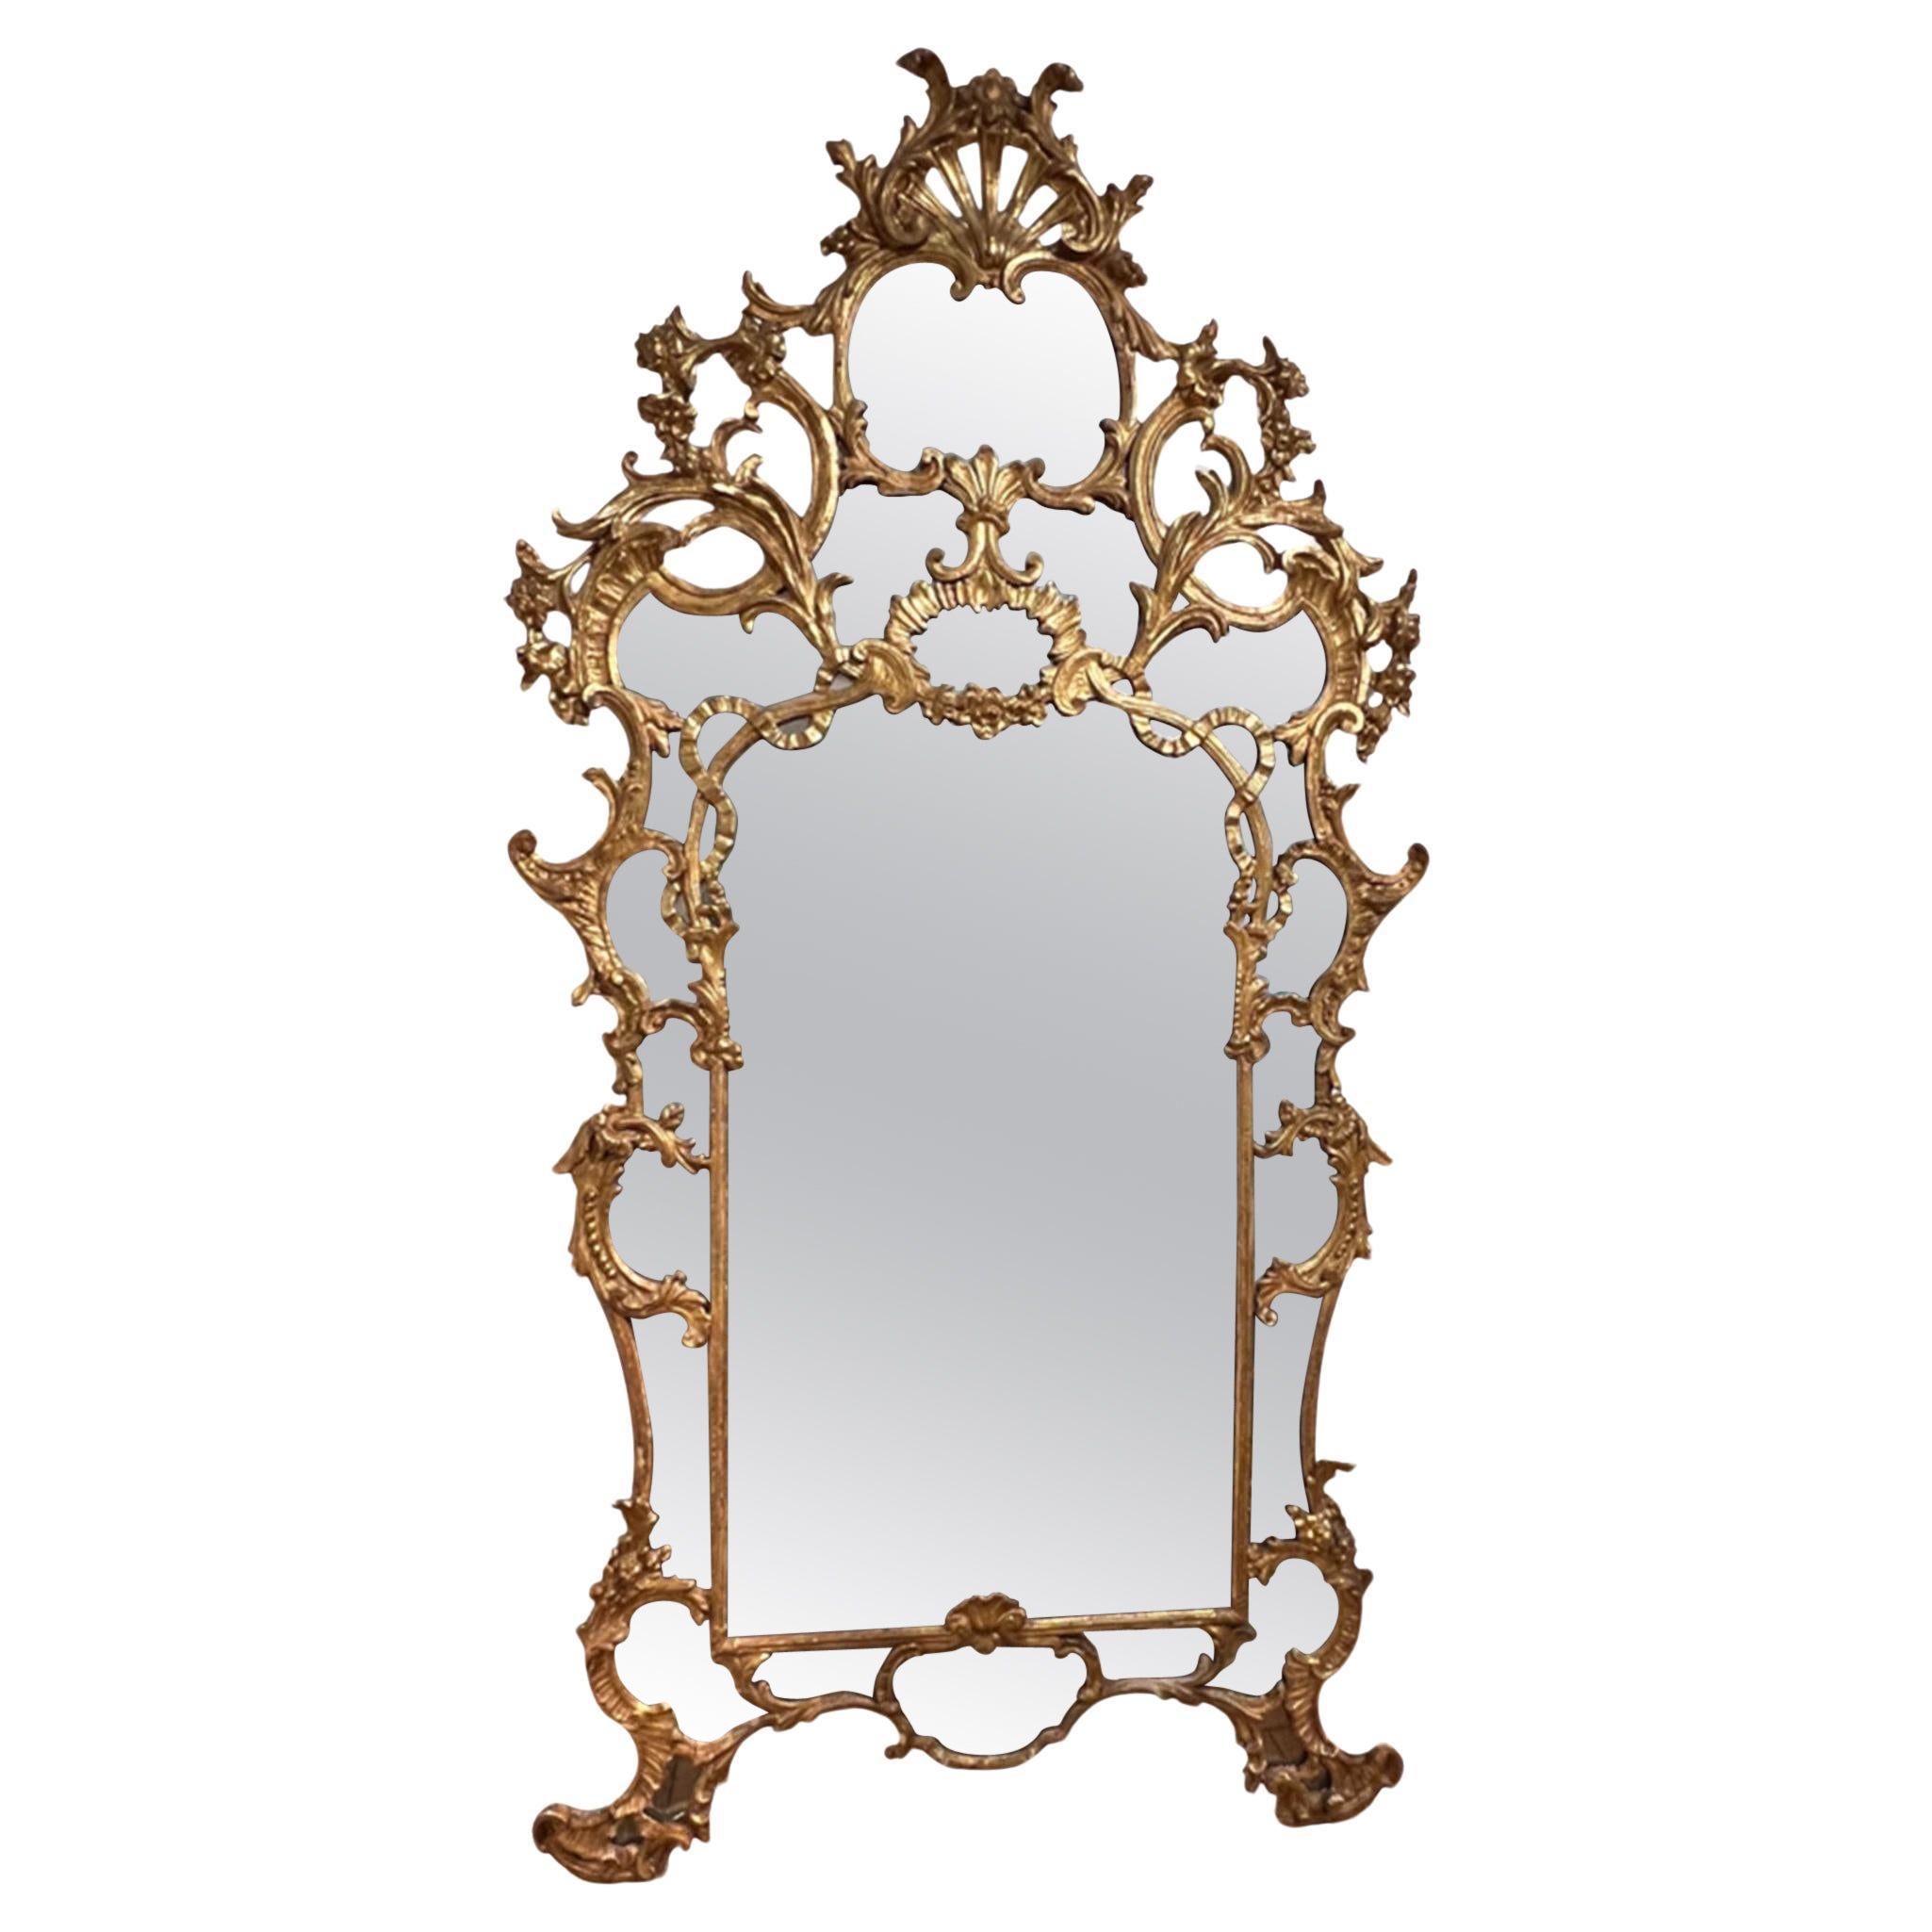 This is a stunning antique mirror - grand scale and highly decorative with beautiful wood  carved framing and the original plate glass. 

Please take a look at all our pictures to see the detail and incredible craftsmanship.

A gorgeous mirror of